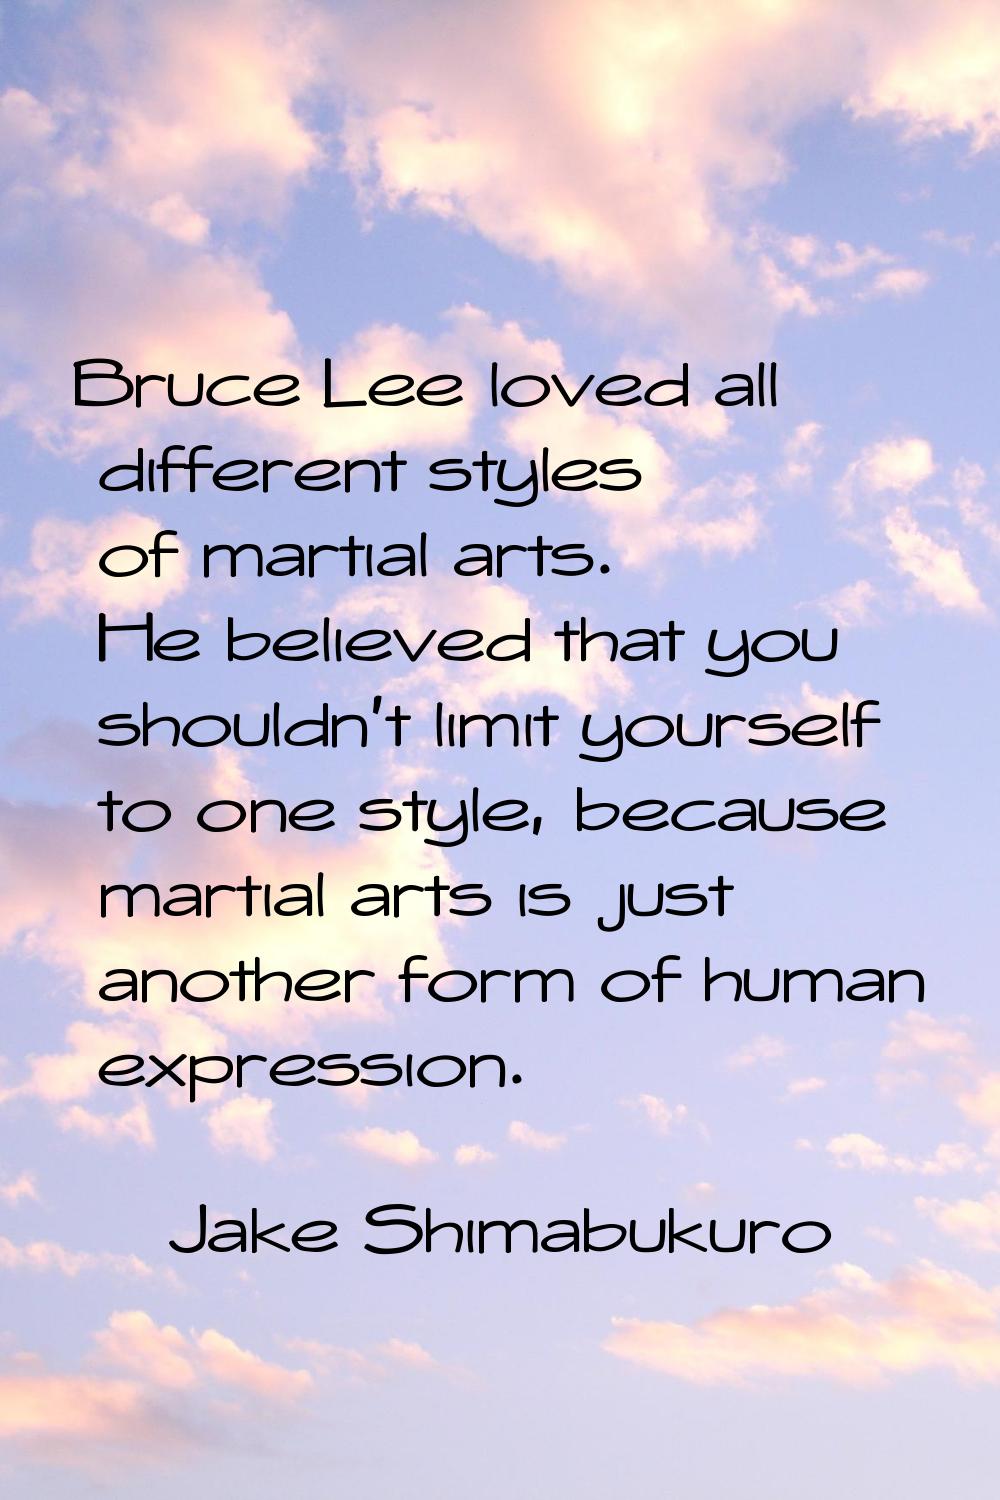 Bruce Lee loved all different styles of martial arts. He believed that you shouldn't limit yourself